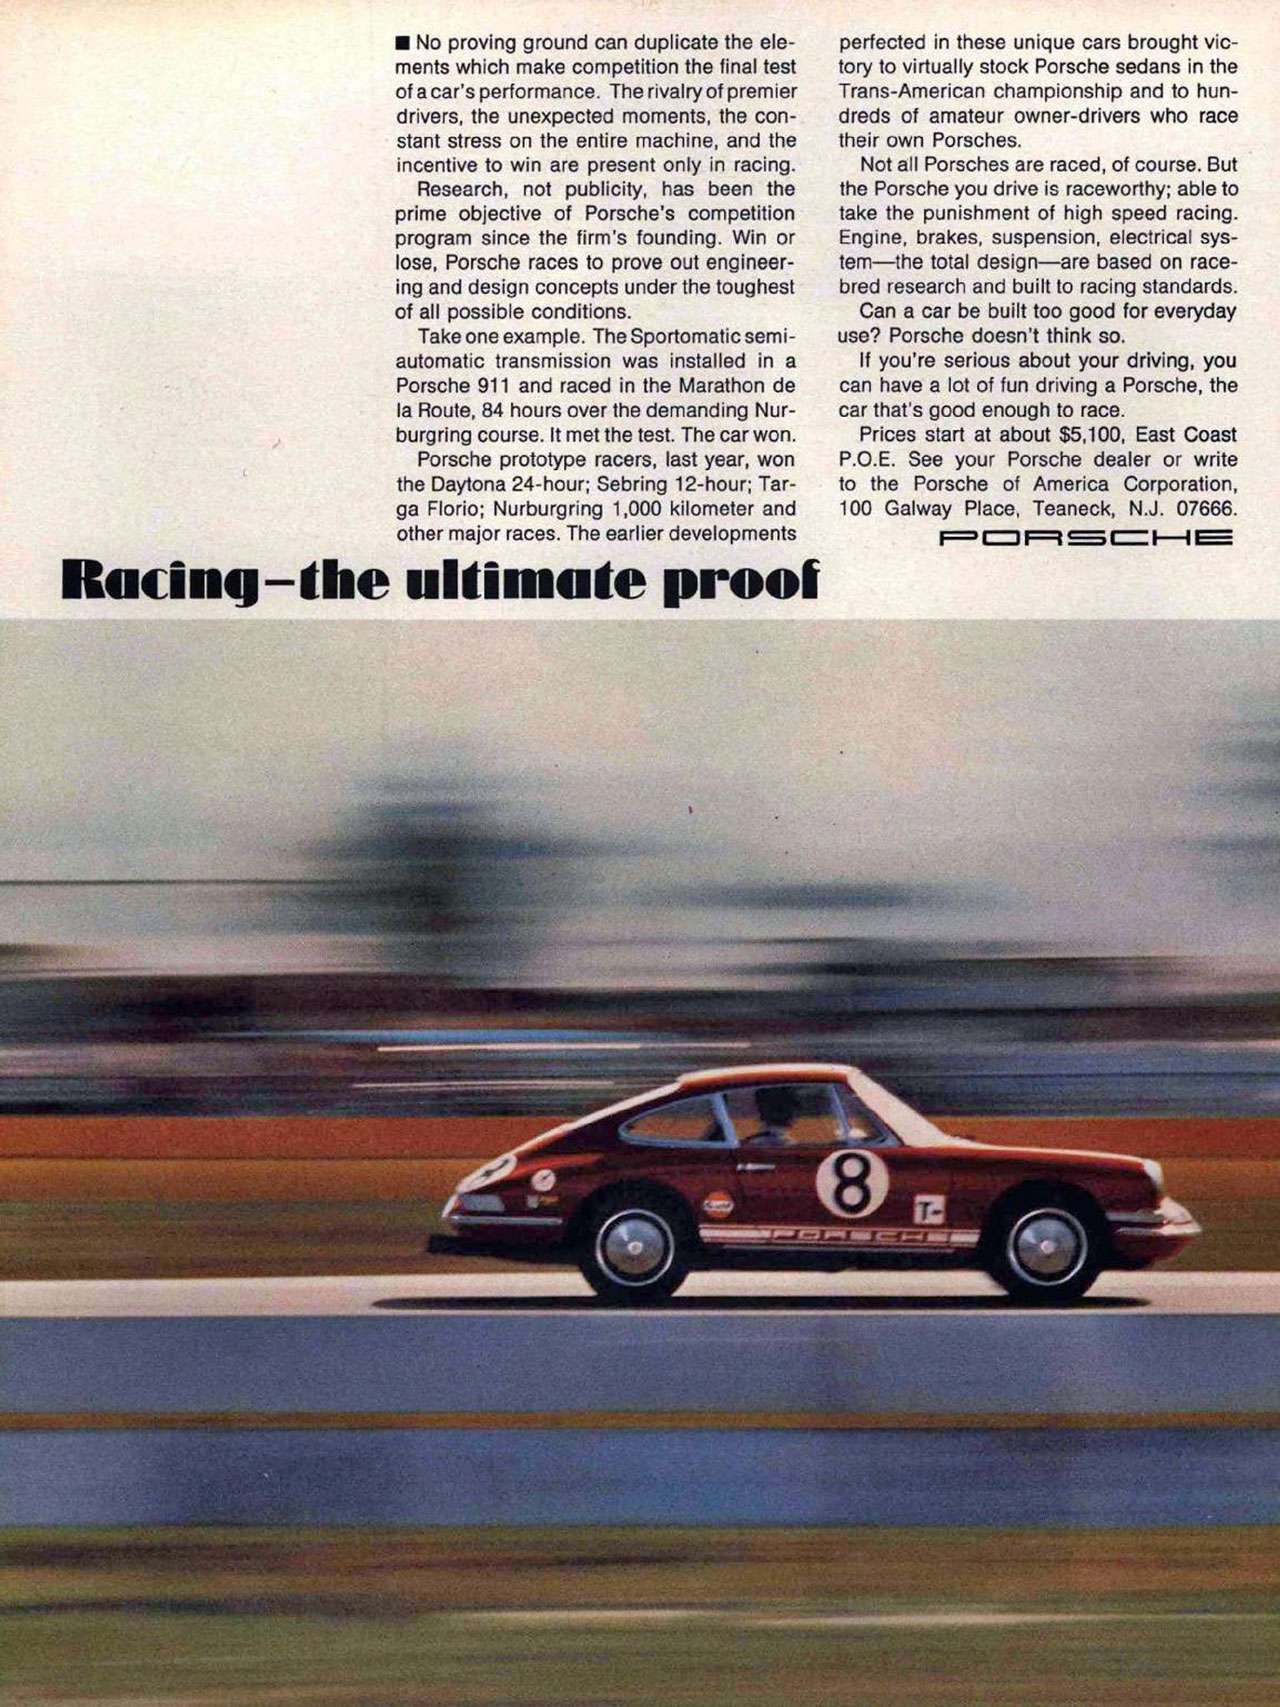 Racing. The ultimate proof. Porsche. No proving ground can duplicate the ele-ments which make competition the final test of a car's performance. The rivalry of premier drivers, the unexpected moments, the con-stant stress on the entire machine, and the incentive to win are present only in racing. Research, not publicity, has been the prime objective of Porsche's competition program since the firm's founding. Win or lose, Porsche races to prove out engineer-ing and design concepts under the toughest of all possible conditions. Take one example. The Sportomatic semi-automatic transmission was installed in a Porsche 911 and raced in the Marathon de la Route, 84 hours over the demanding Nur-burg ring course. It met the test. The car won. Porsche prototype racers, last year, won the Daytona 24-hour; Sebring 12-hour; Tar-ga Florio; Nurburgring 1,000 kilometer and other major races. The earlier developments perfected in these unique cars brought vic-tory to virtually stock Porsche sedans in the Trans-American championship and to hun-dreds of amateur owner-drivers who race their own Porsches. Not all Porsches are raced, of course. But the Porsche you drive is raceworthy; able to take the punishment of high speed racing. Engine, brakes, suspension, electrical sys-tem—the total design—are based on race-bred research and built to racing standards. Can a car be built too good for everyday use? Porsche doesn't think so. If you're serious about your driving, you can have a lot of fun driving a Porsche, the car that's good enough to race. Prices start at about $5,100, East Coast P.O.E. See your Porsche dealer or write to the Porsche of America Corporation, 100 Galway Place, Teaneck, N.J. 07666.